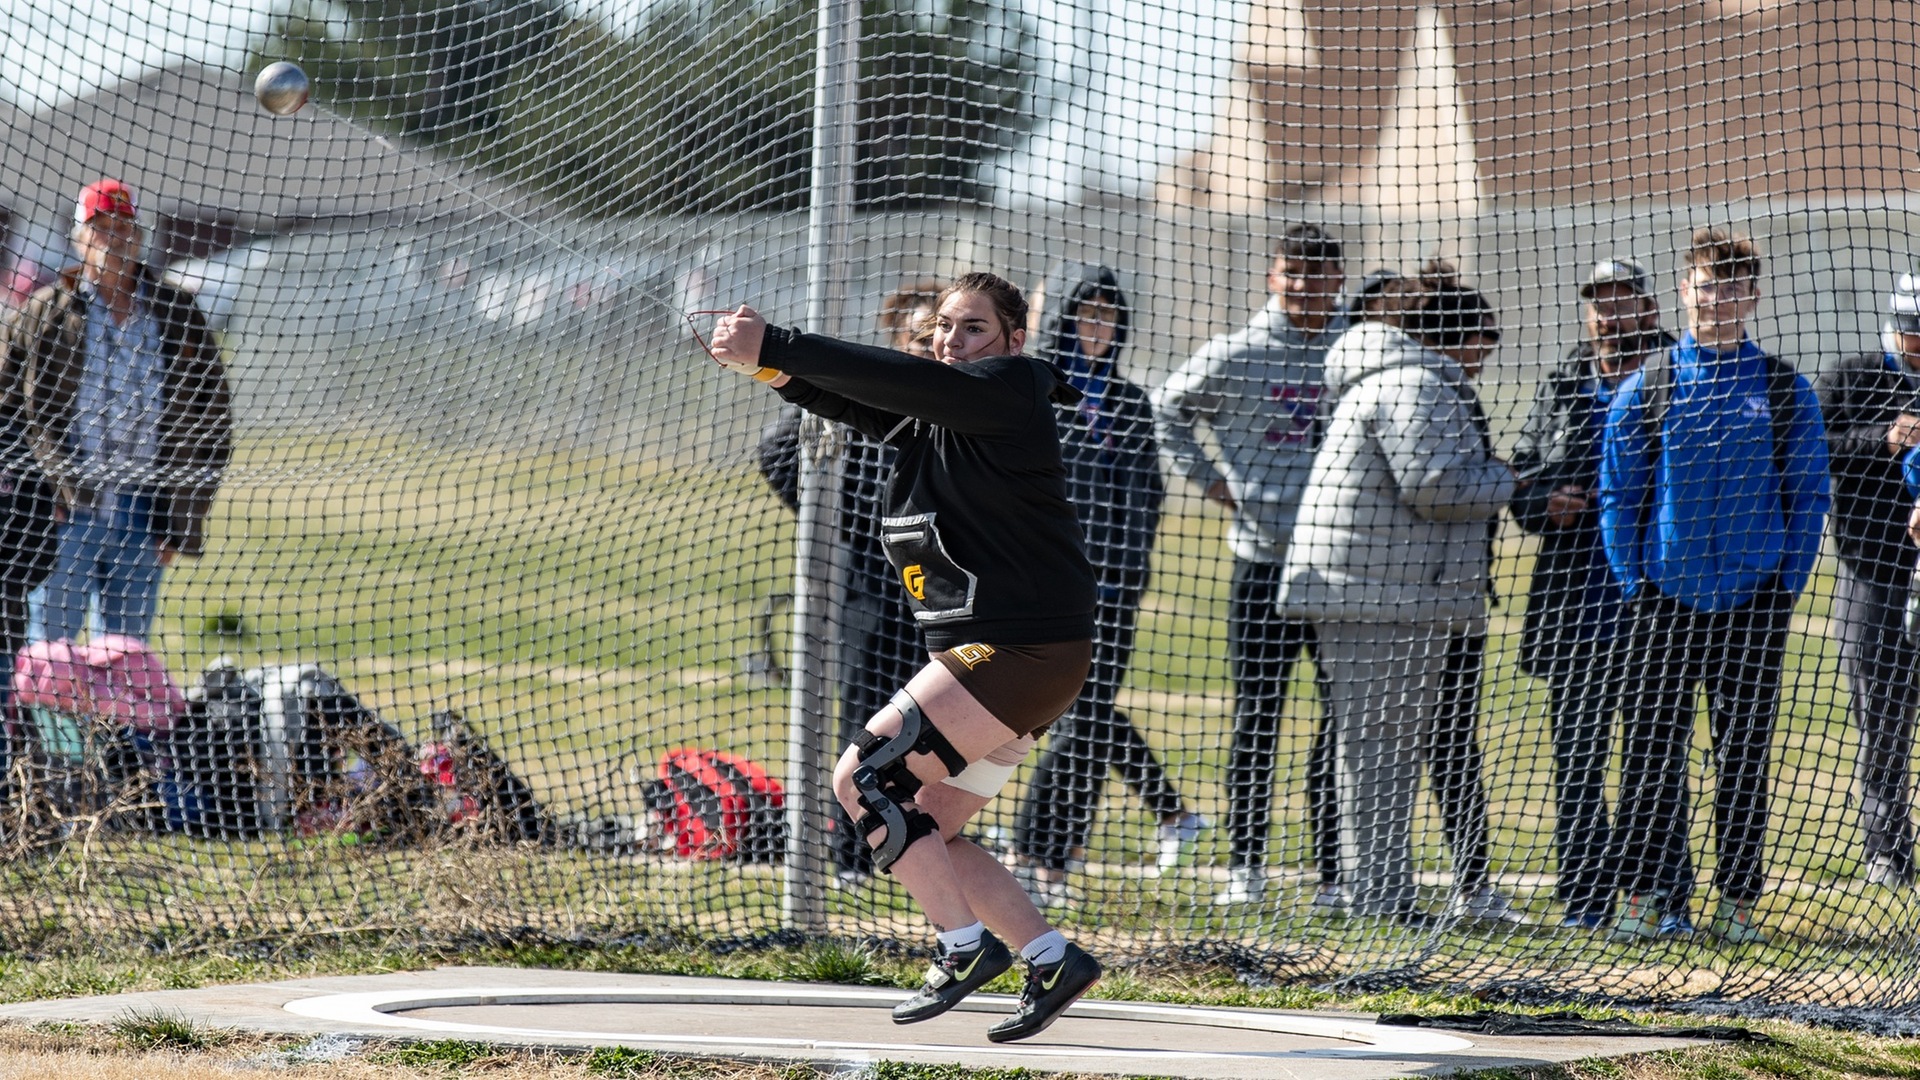 Broncbusters compete at KT Woodman Classic Thumbnail